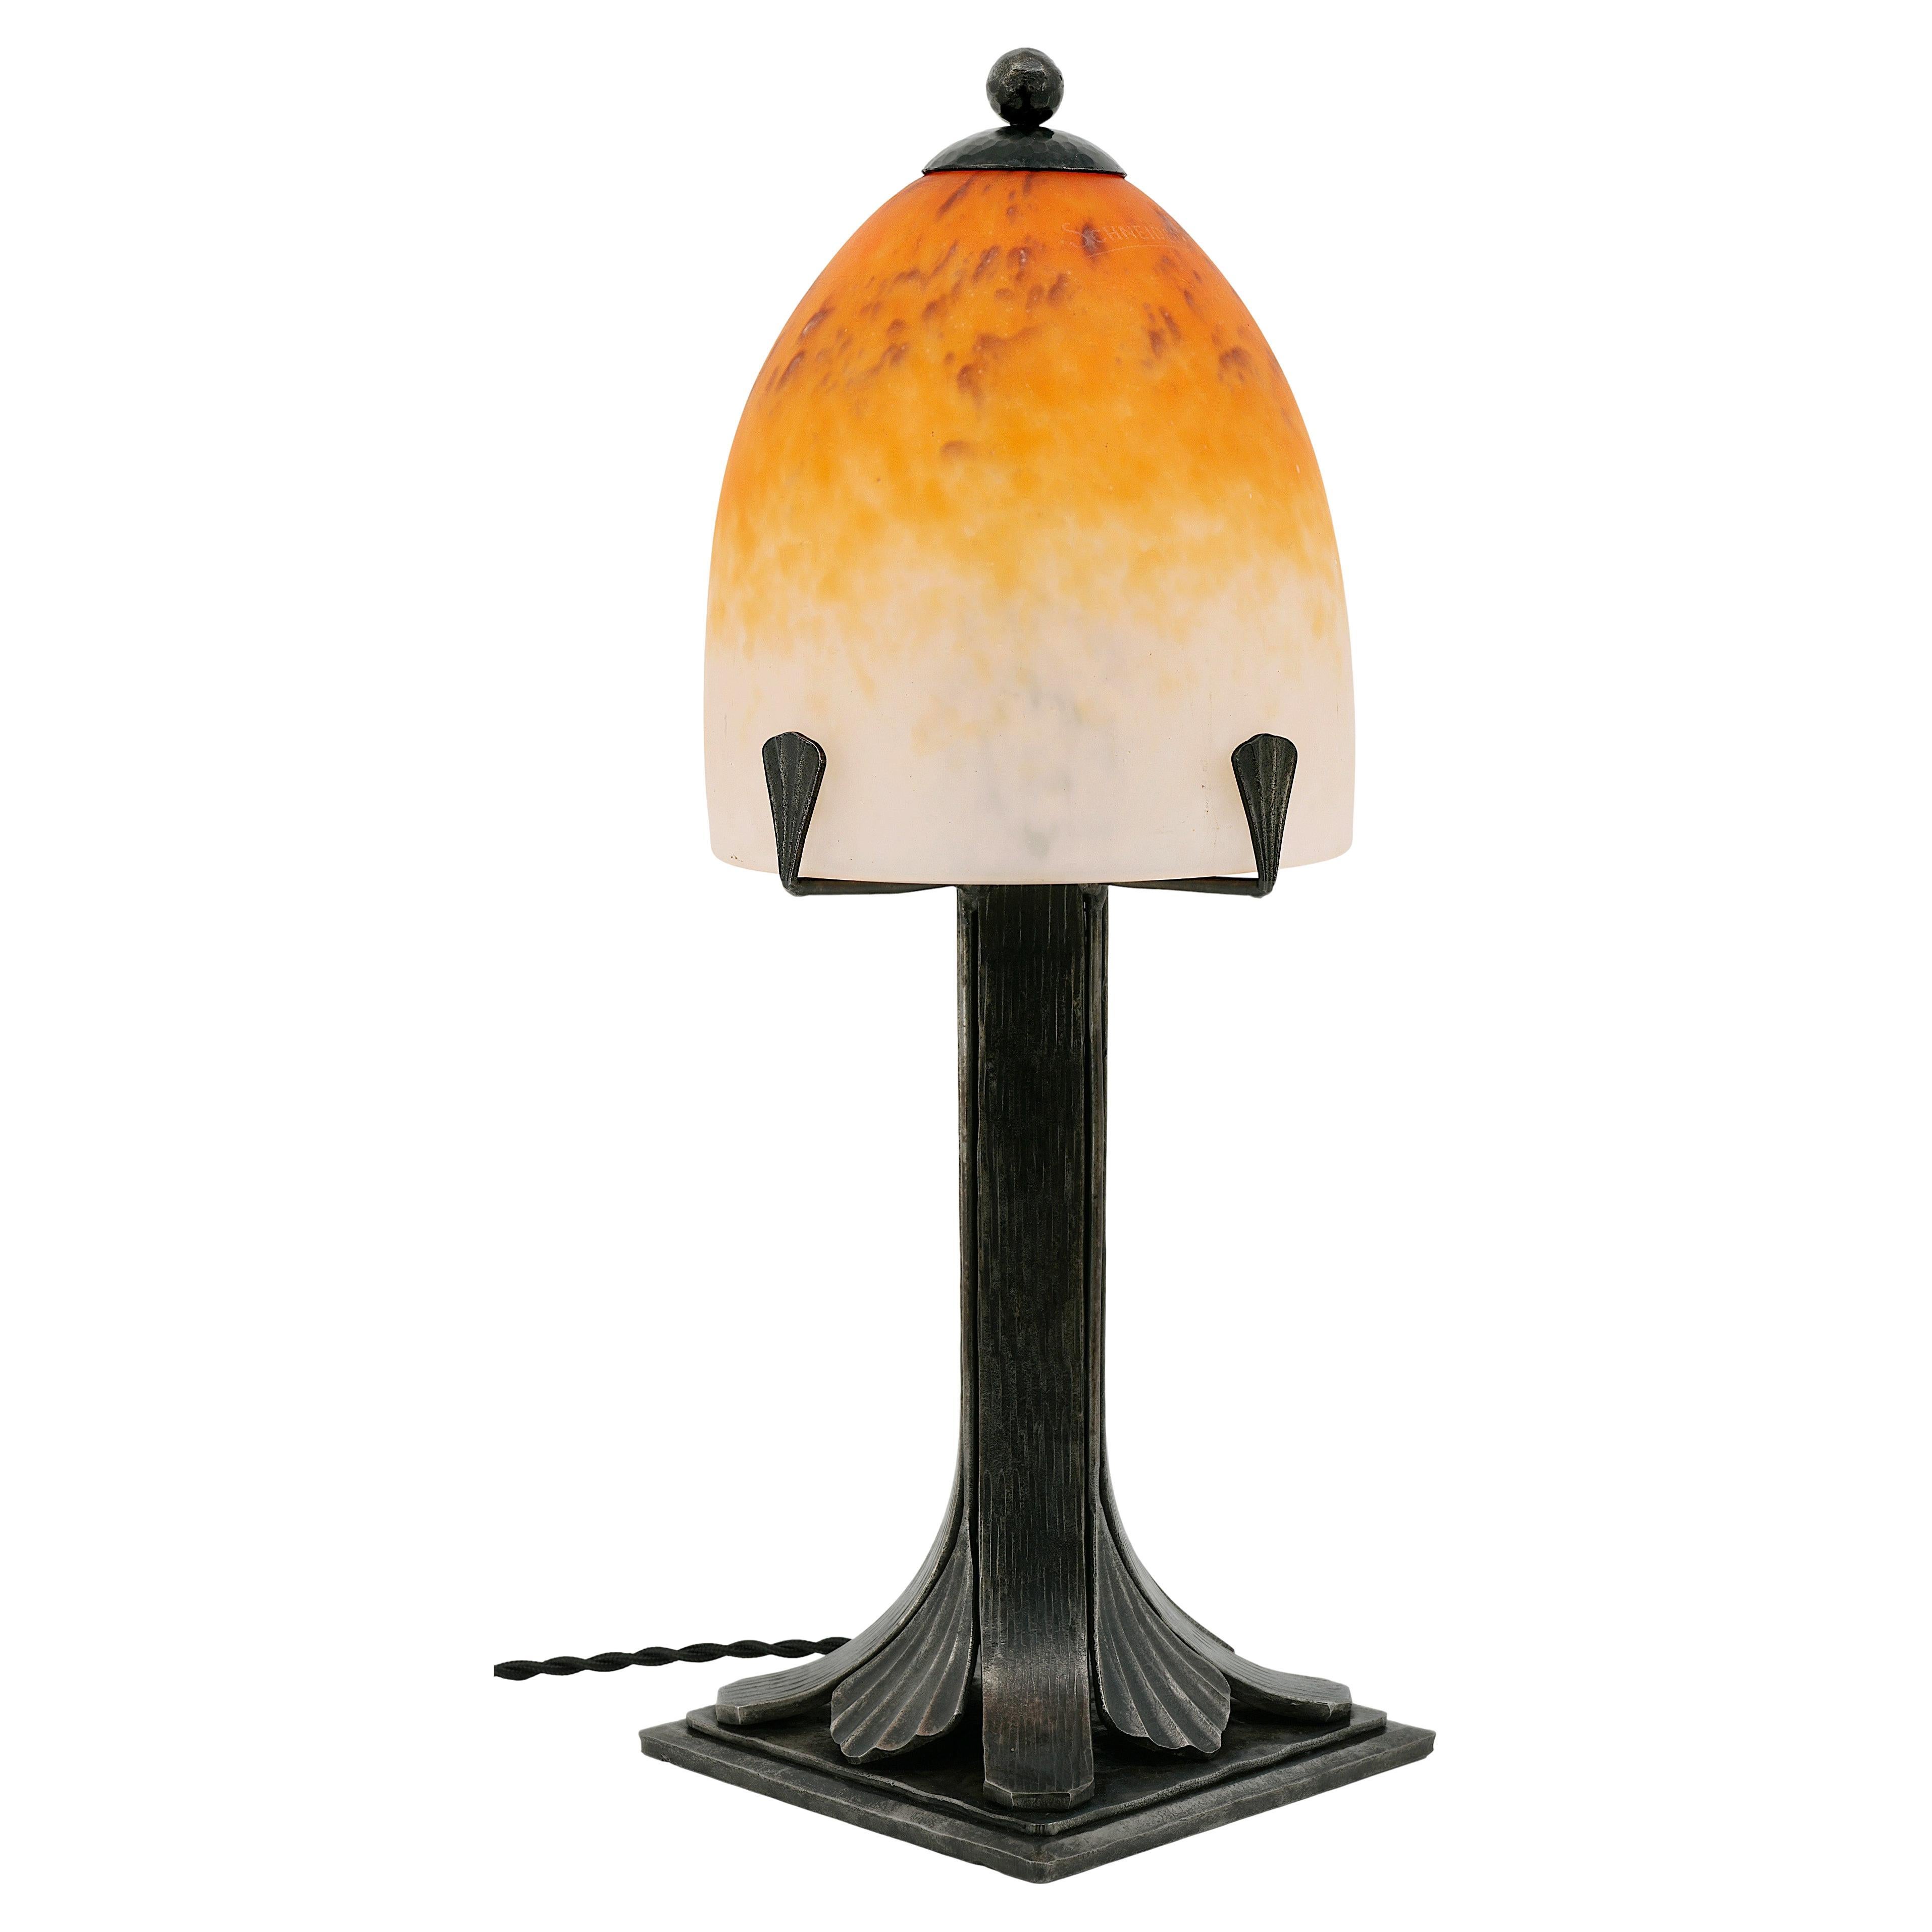 Charles Schneider French Art Deco Table Lamp, 1924-1928 For Sale